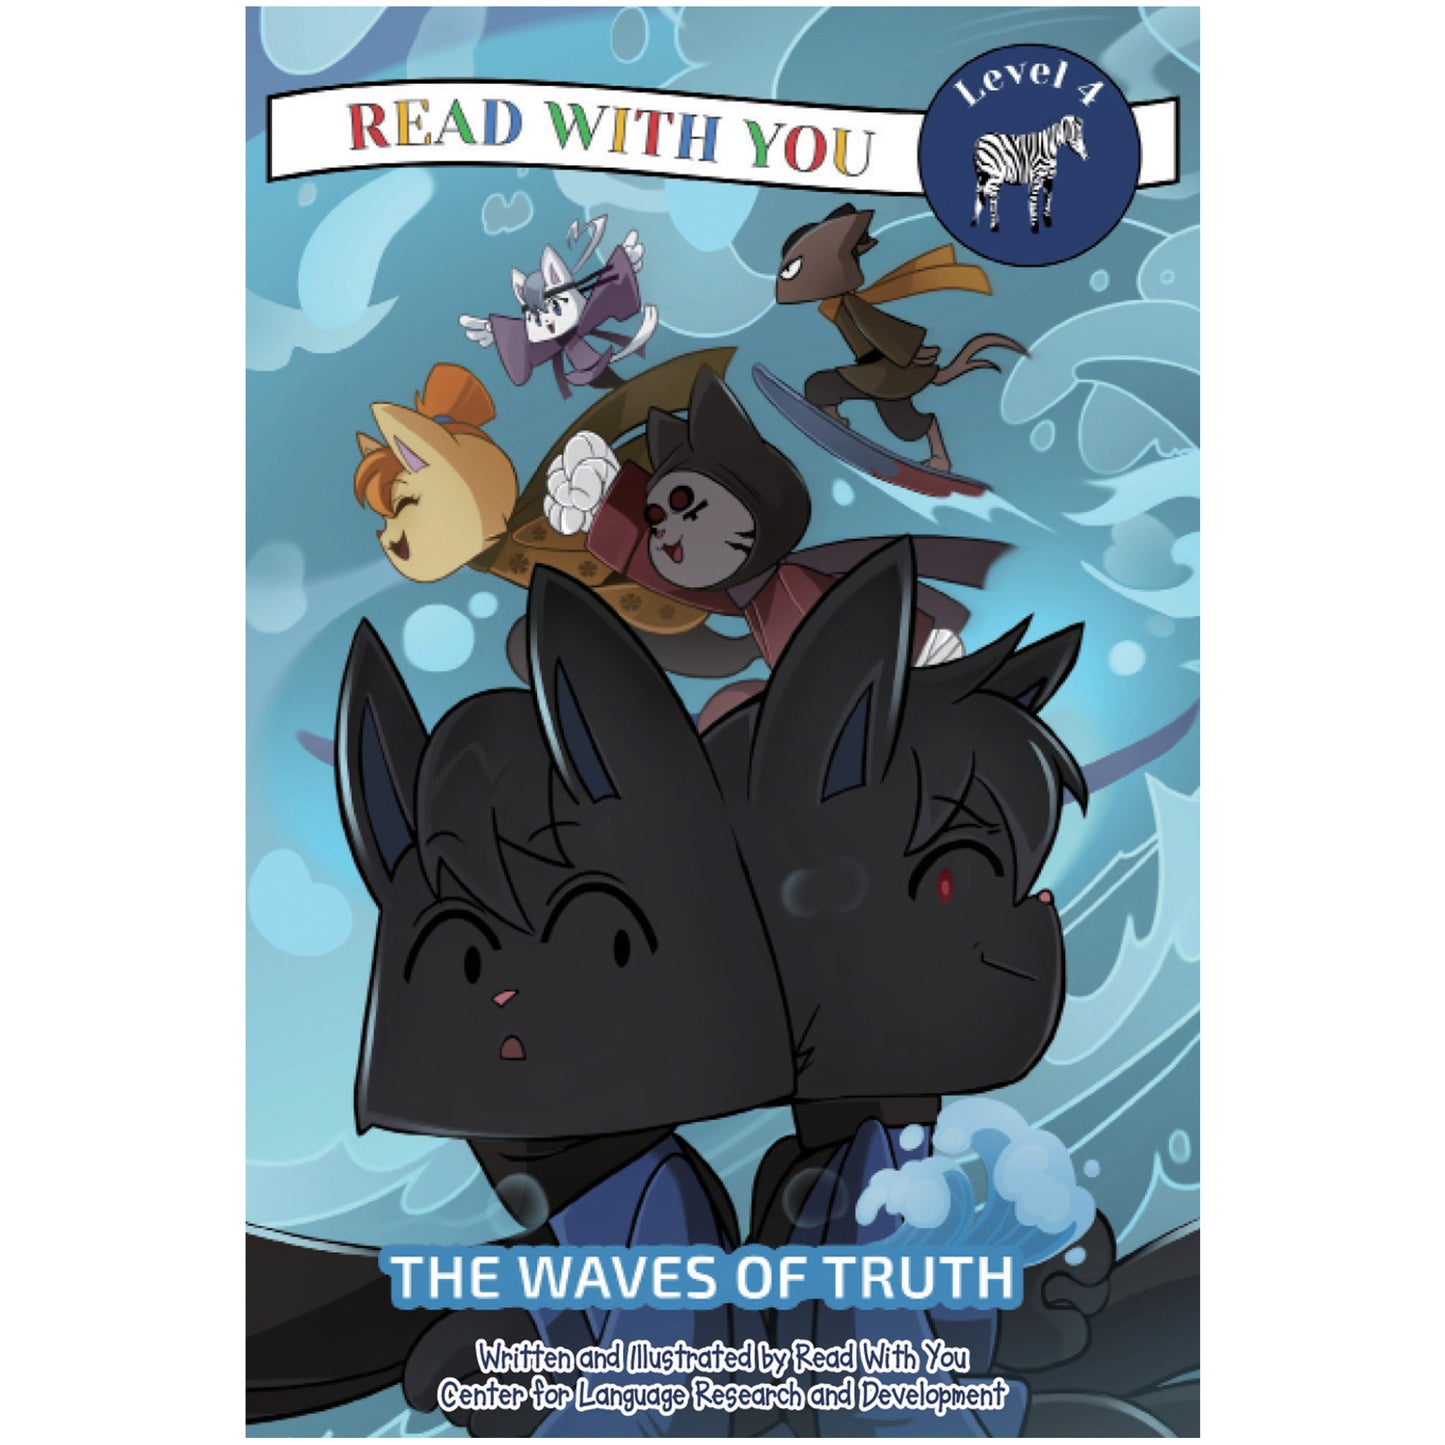 The Waves of Truth